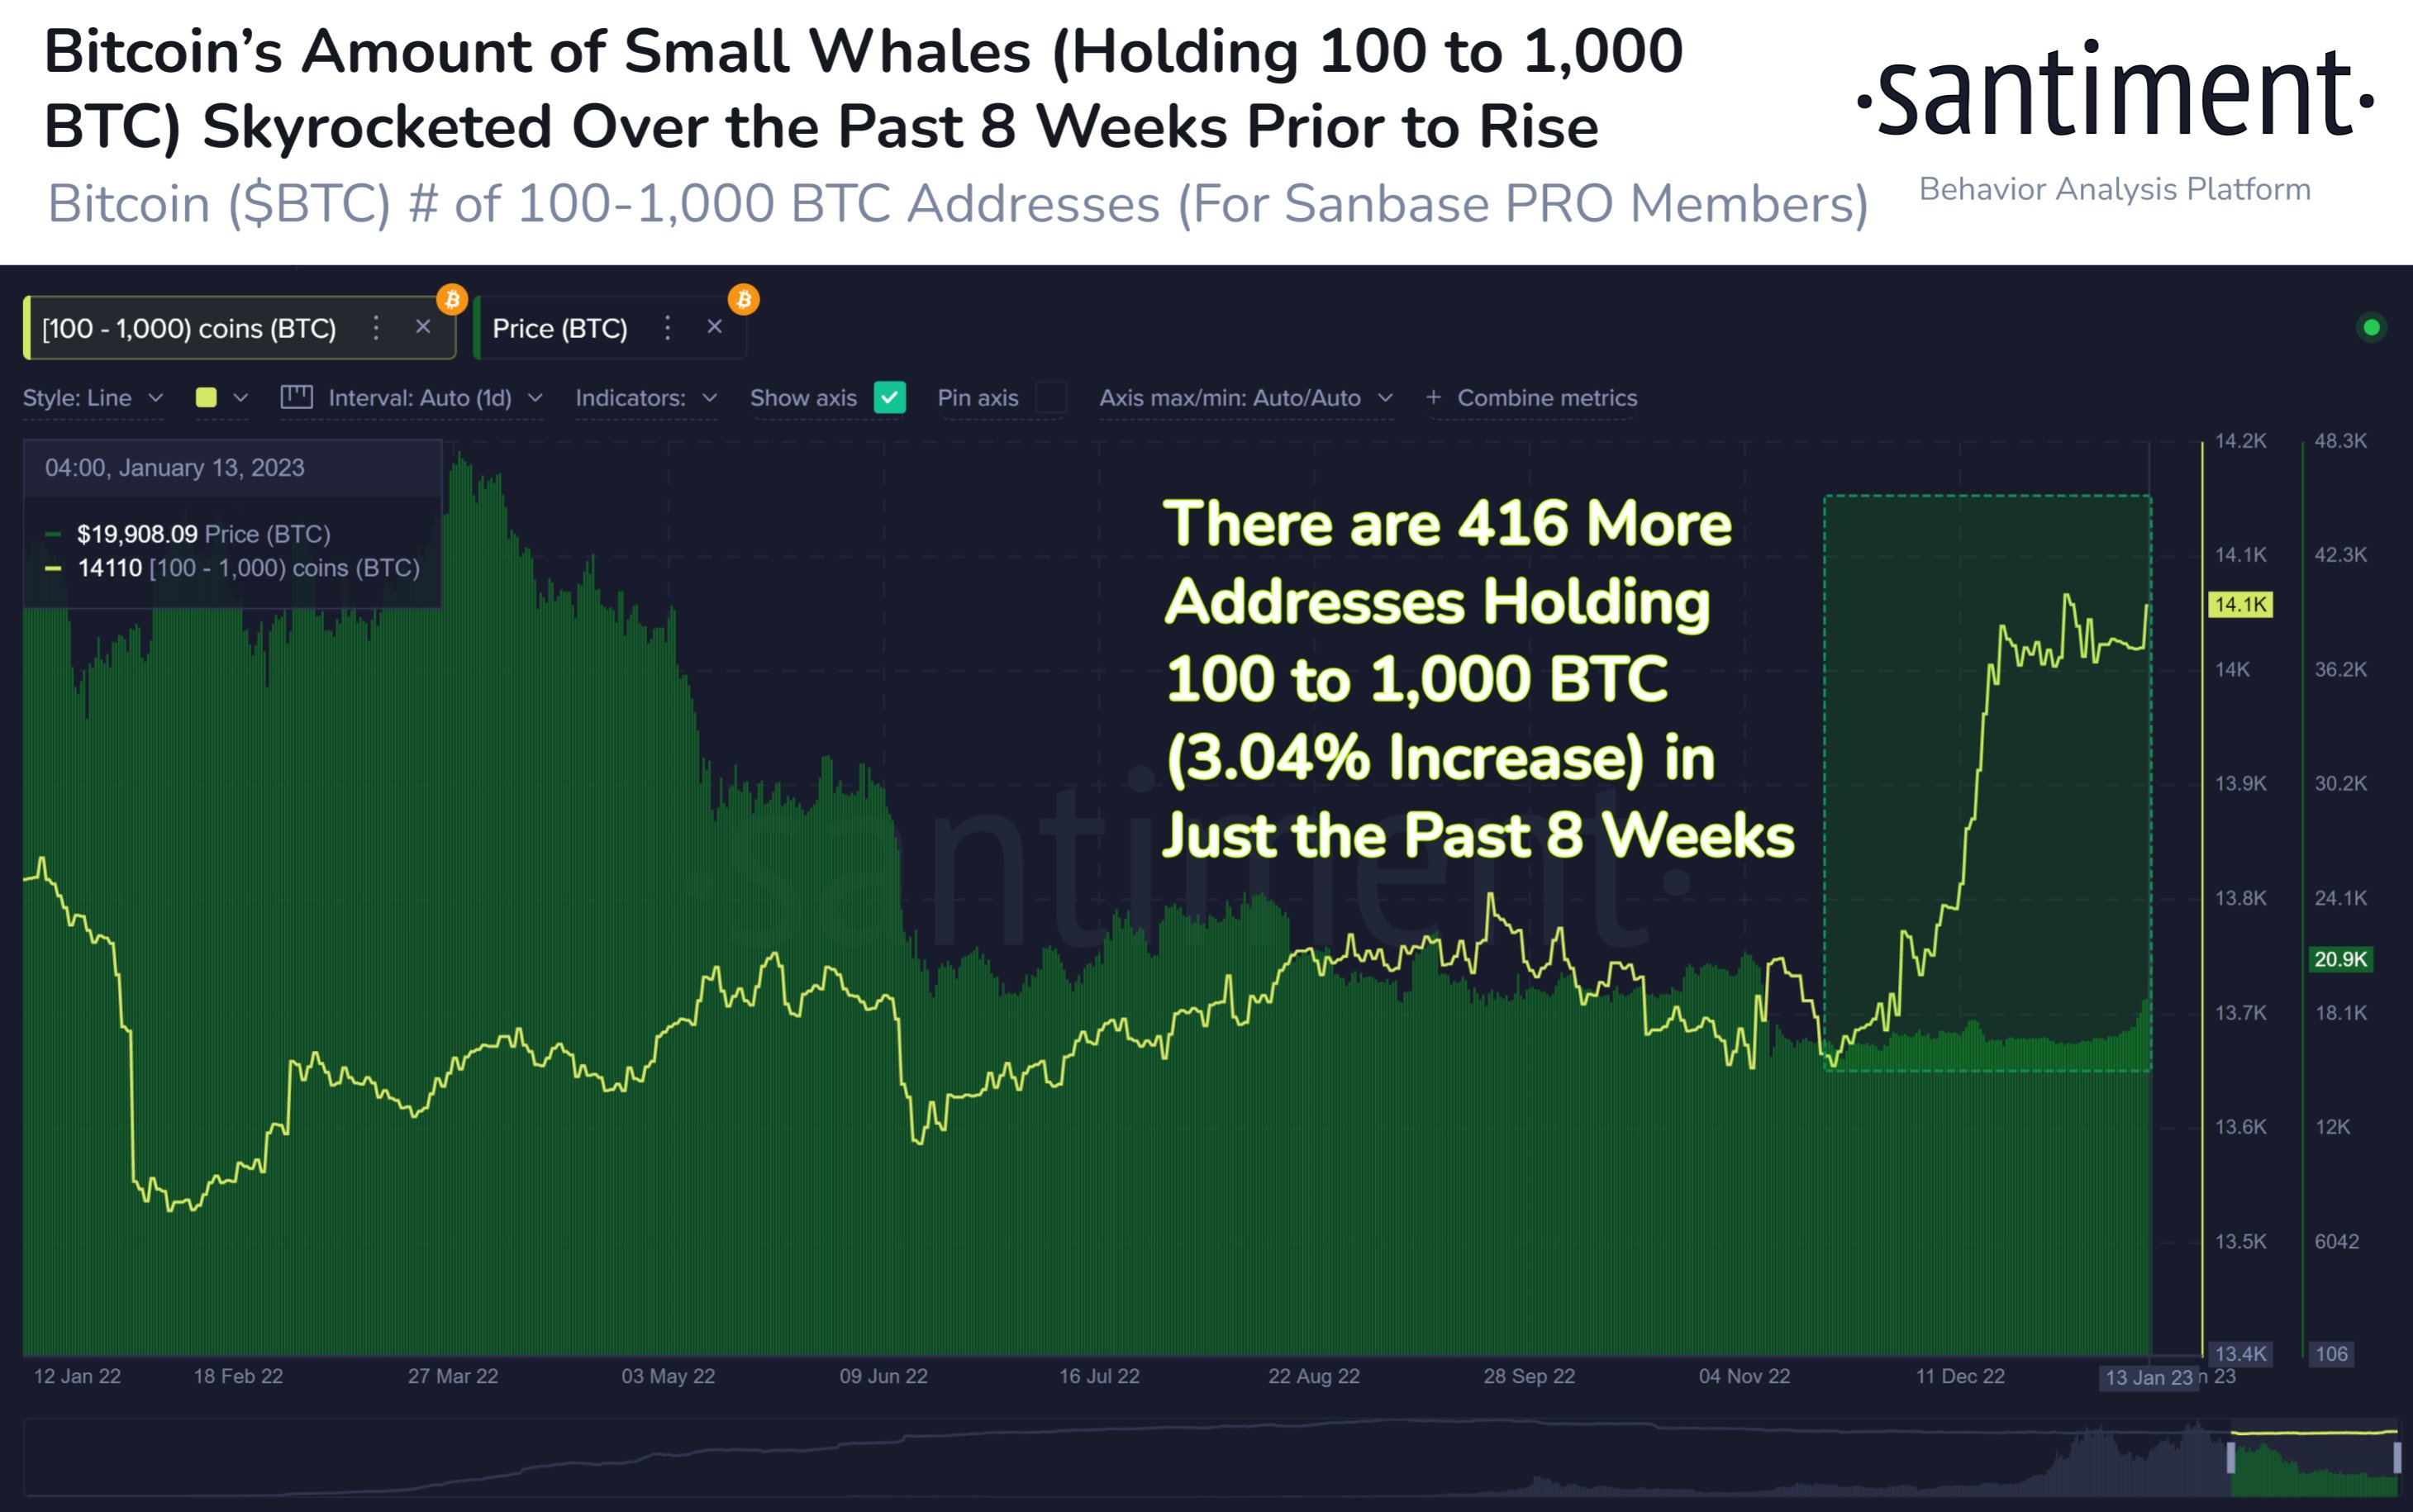 Market Research Report: Crypto Prices Pump as Whales Kill Shorts with Massive Short Squeezes, Gold Breaks $1,900 After Tamer US CPI - BTC small whales